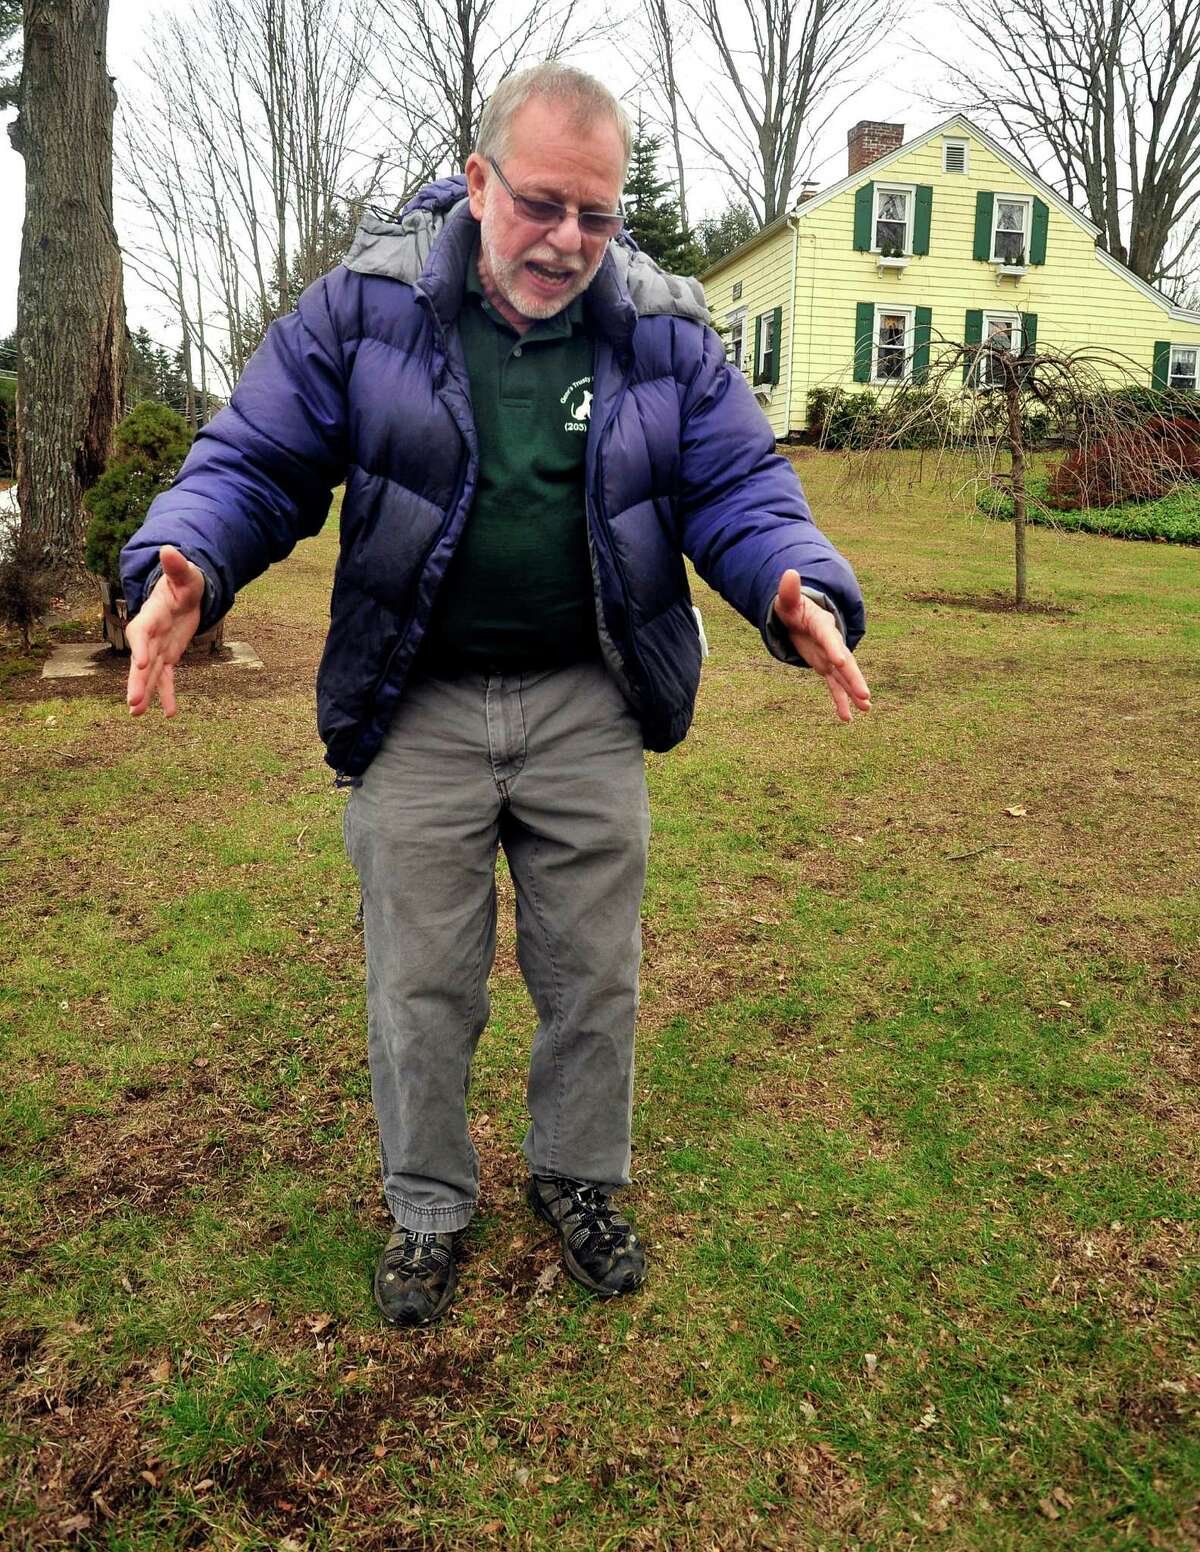 Gene Rosen stands in front of his Newtown home and shows the spot where he found six children from neighboring Sandy Hook Elementary School huddled on his lawn last Friday. Photographed Thursday, Dec. 20, 2012.